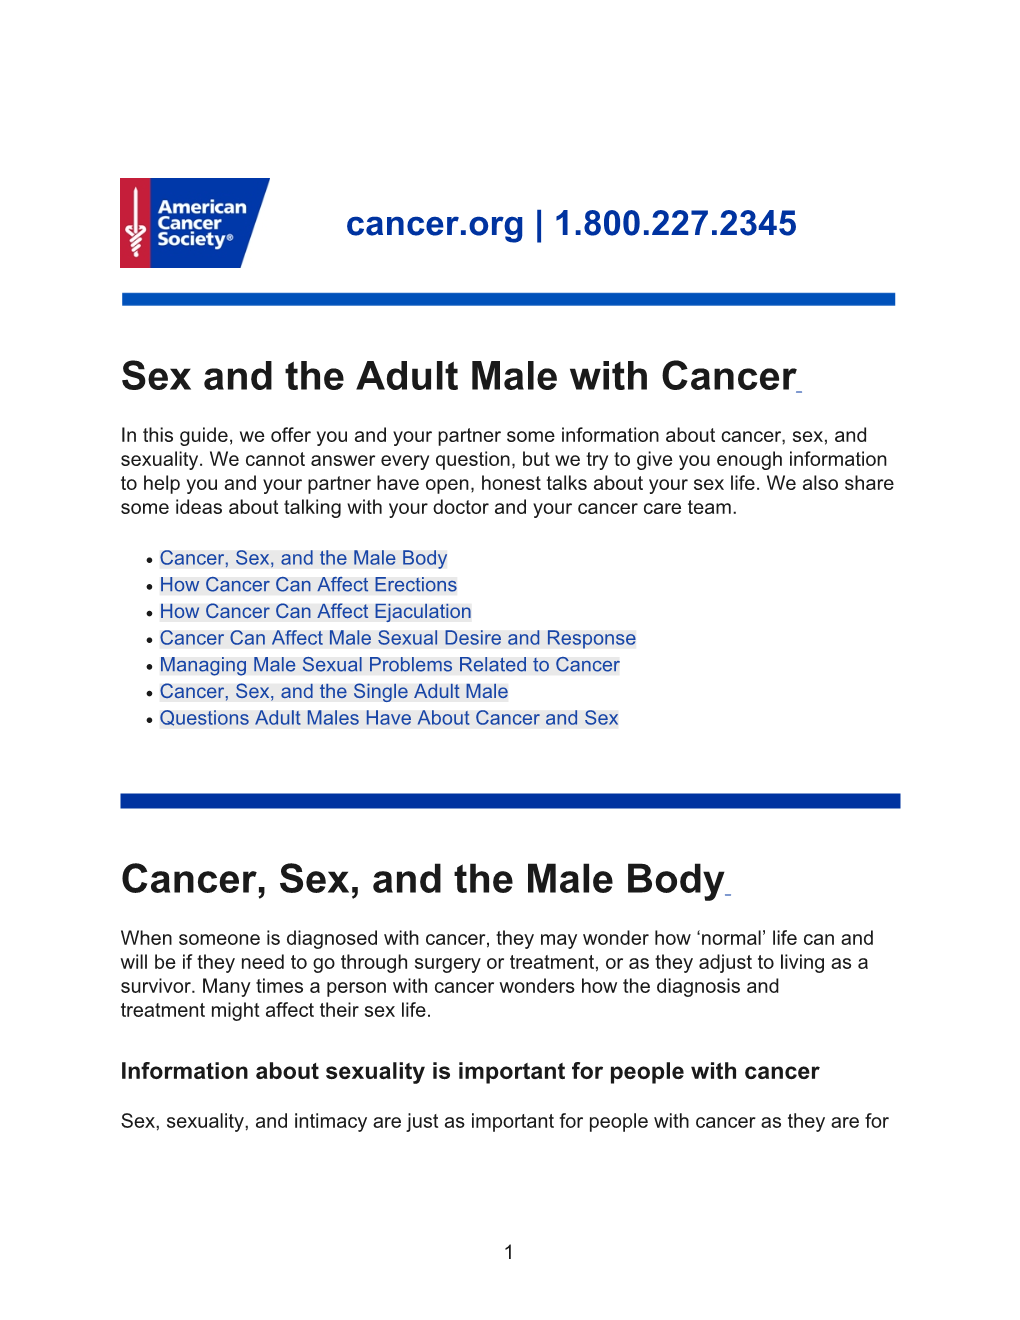 Cancer, Sex, and the Male Body